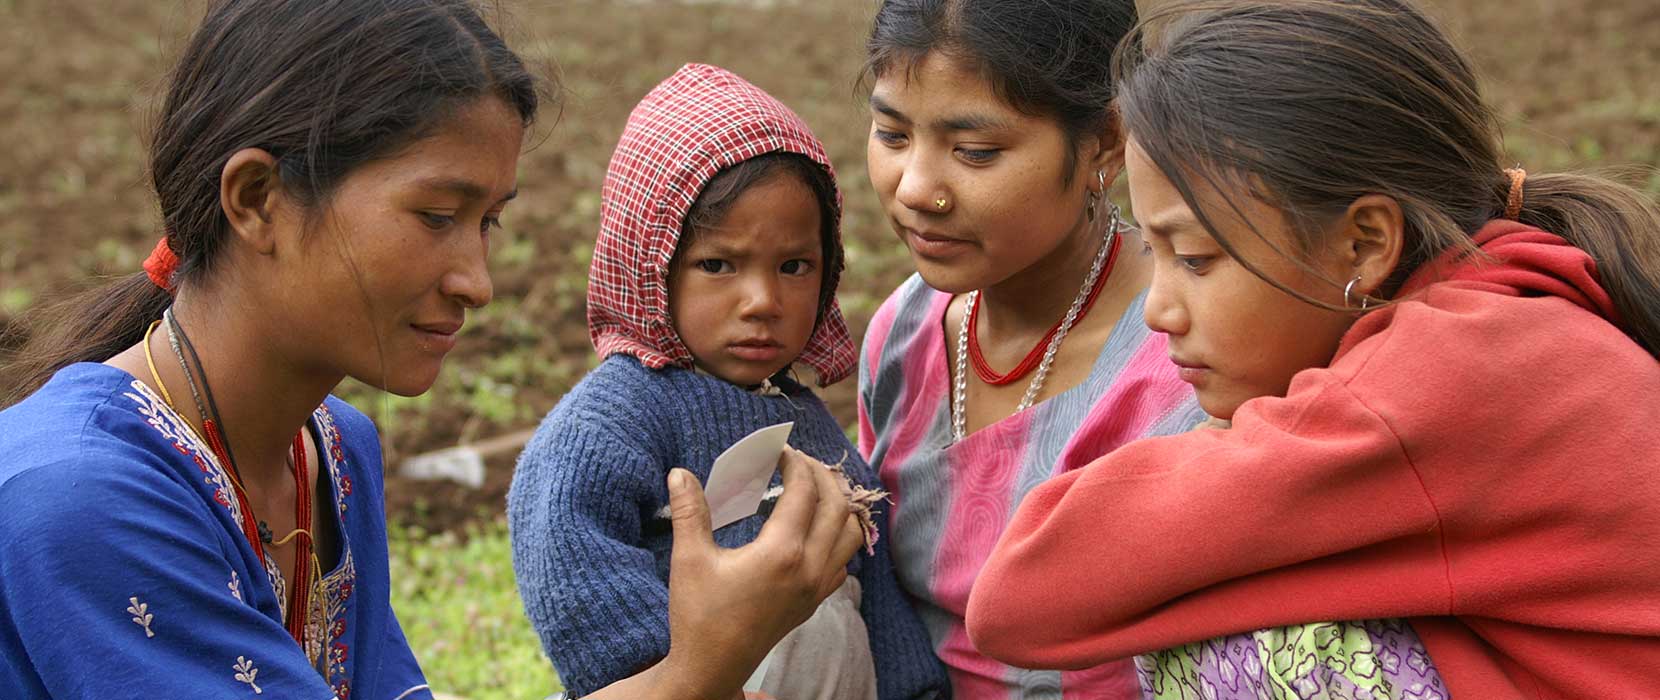 Three Nepalese women with a child, looking at a photograph, in a rural setting.